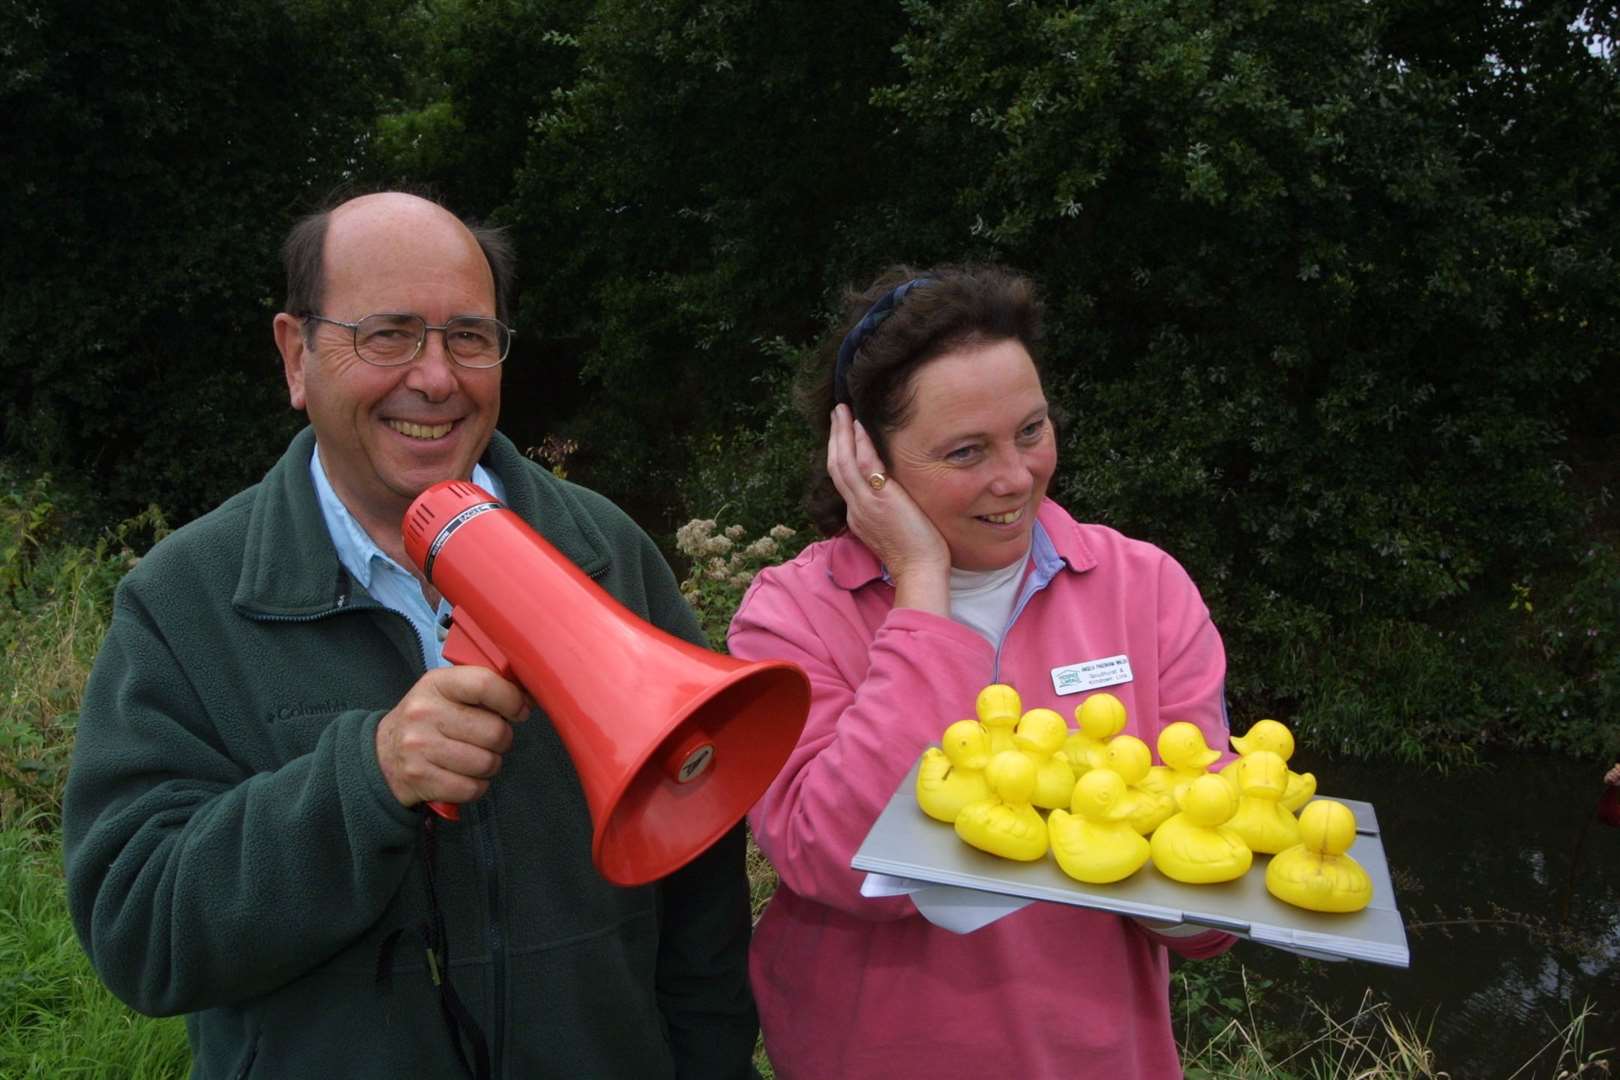 Anthony Farnfield and Angela Packenham-Walsh getting plastic ducks ready for a charity river race in support for the Hospice in the Weald at Harpers Farm, Goudhurst, in 2002